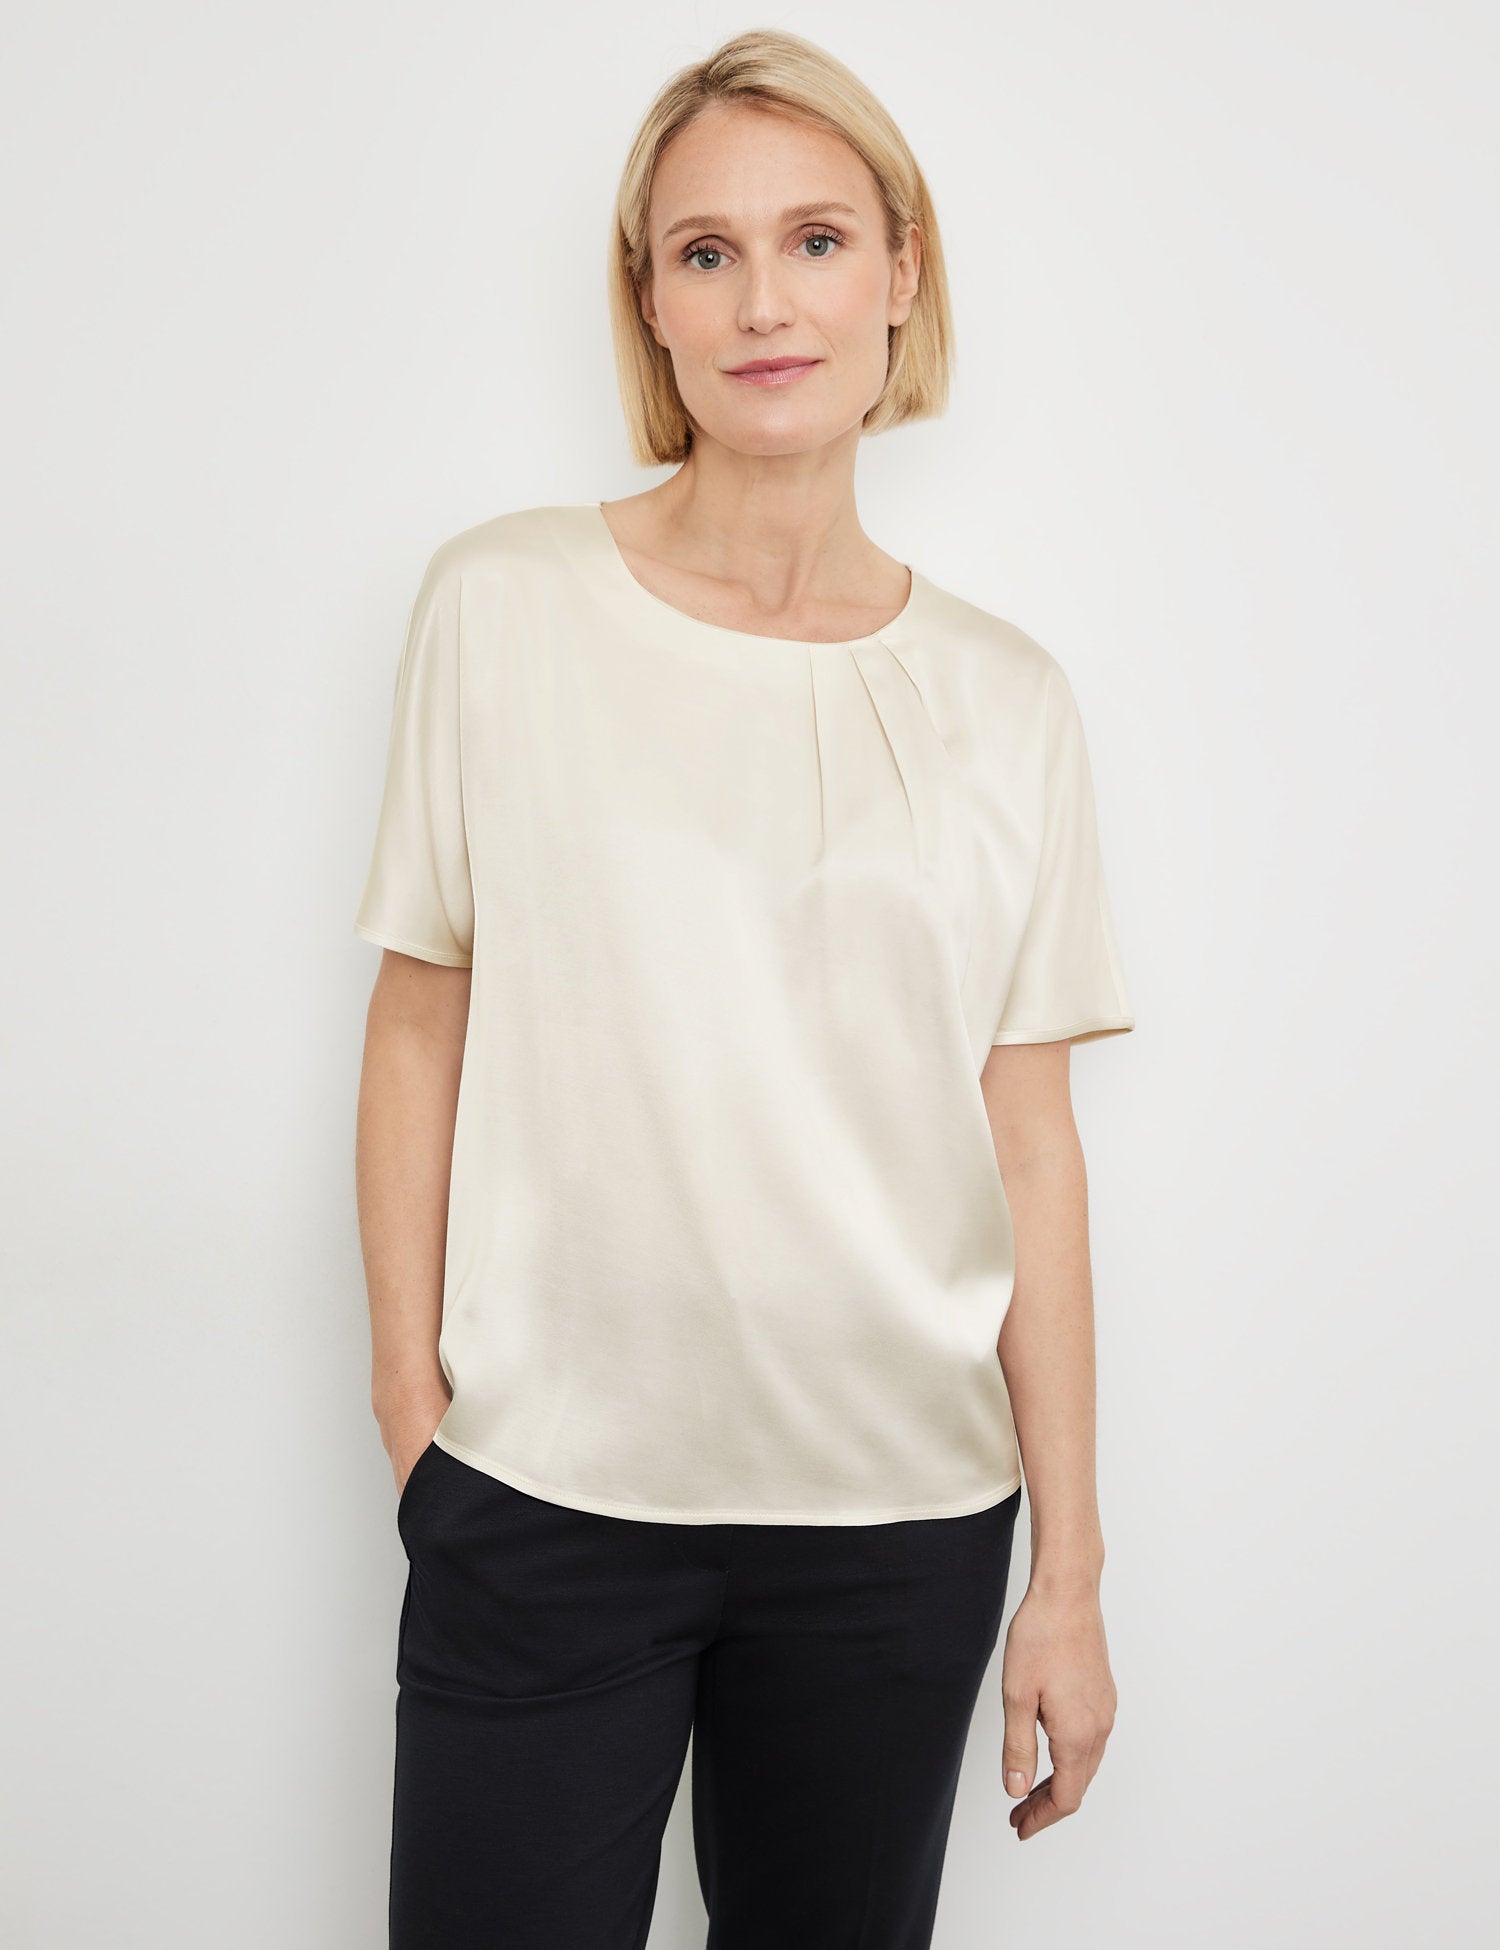 Flowing Blouse Top With Fabric Panelling_977047-35033_90118_03